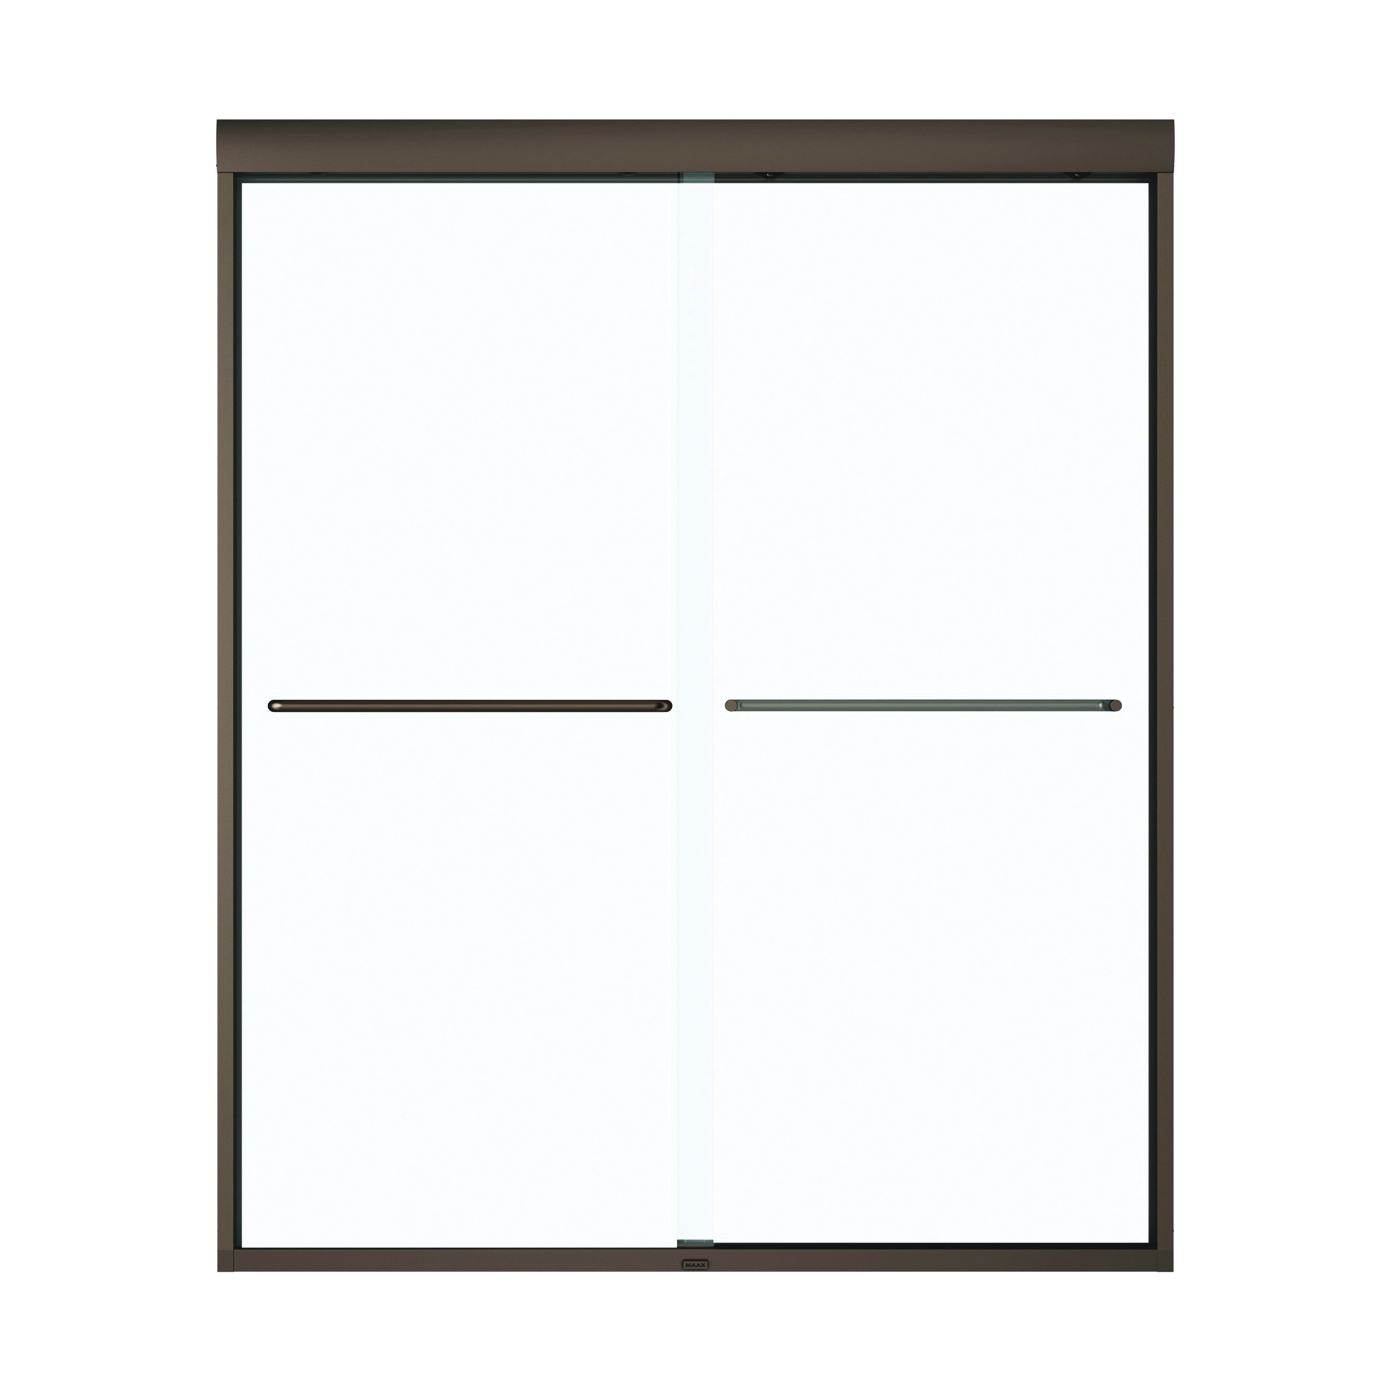 Aura 135665-900-172 Shower Door, Clear Glass, Tempered Glass, Semi Frame, 2-Panel, Glass, 1/4 in Glass